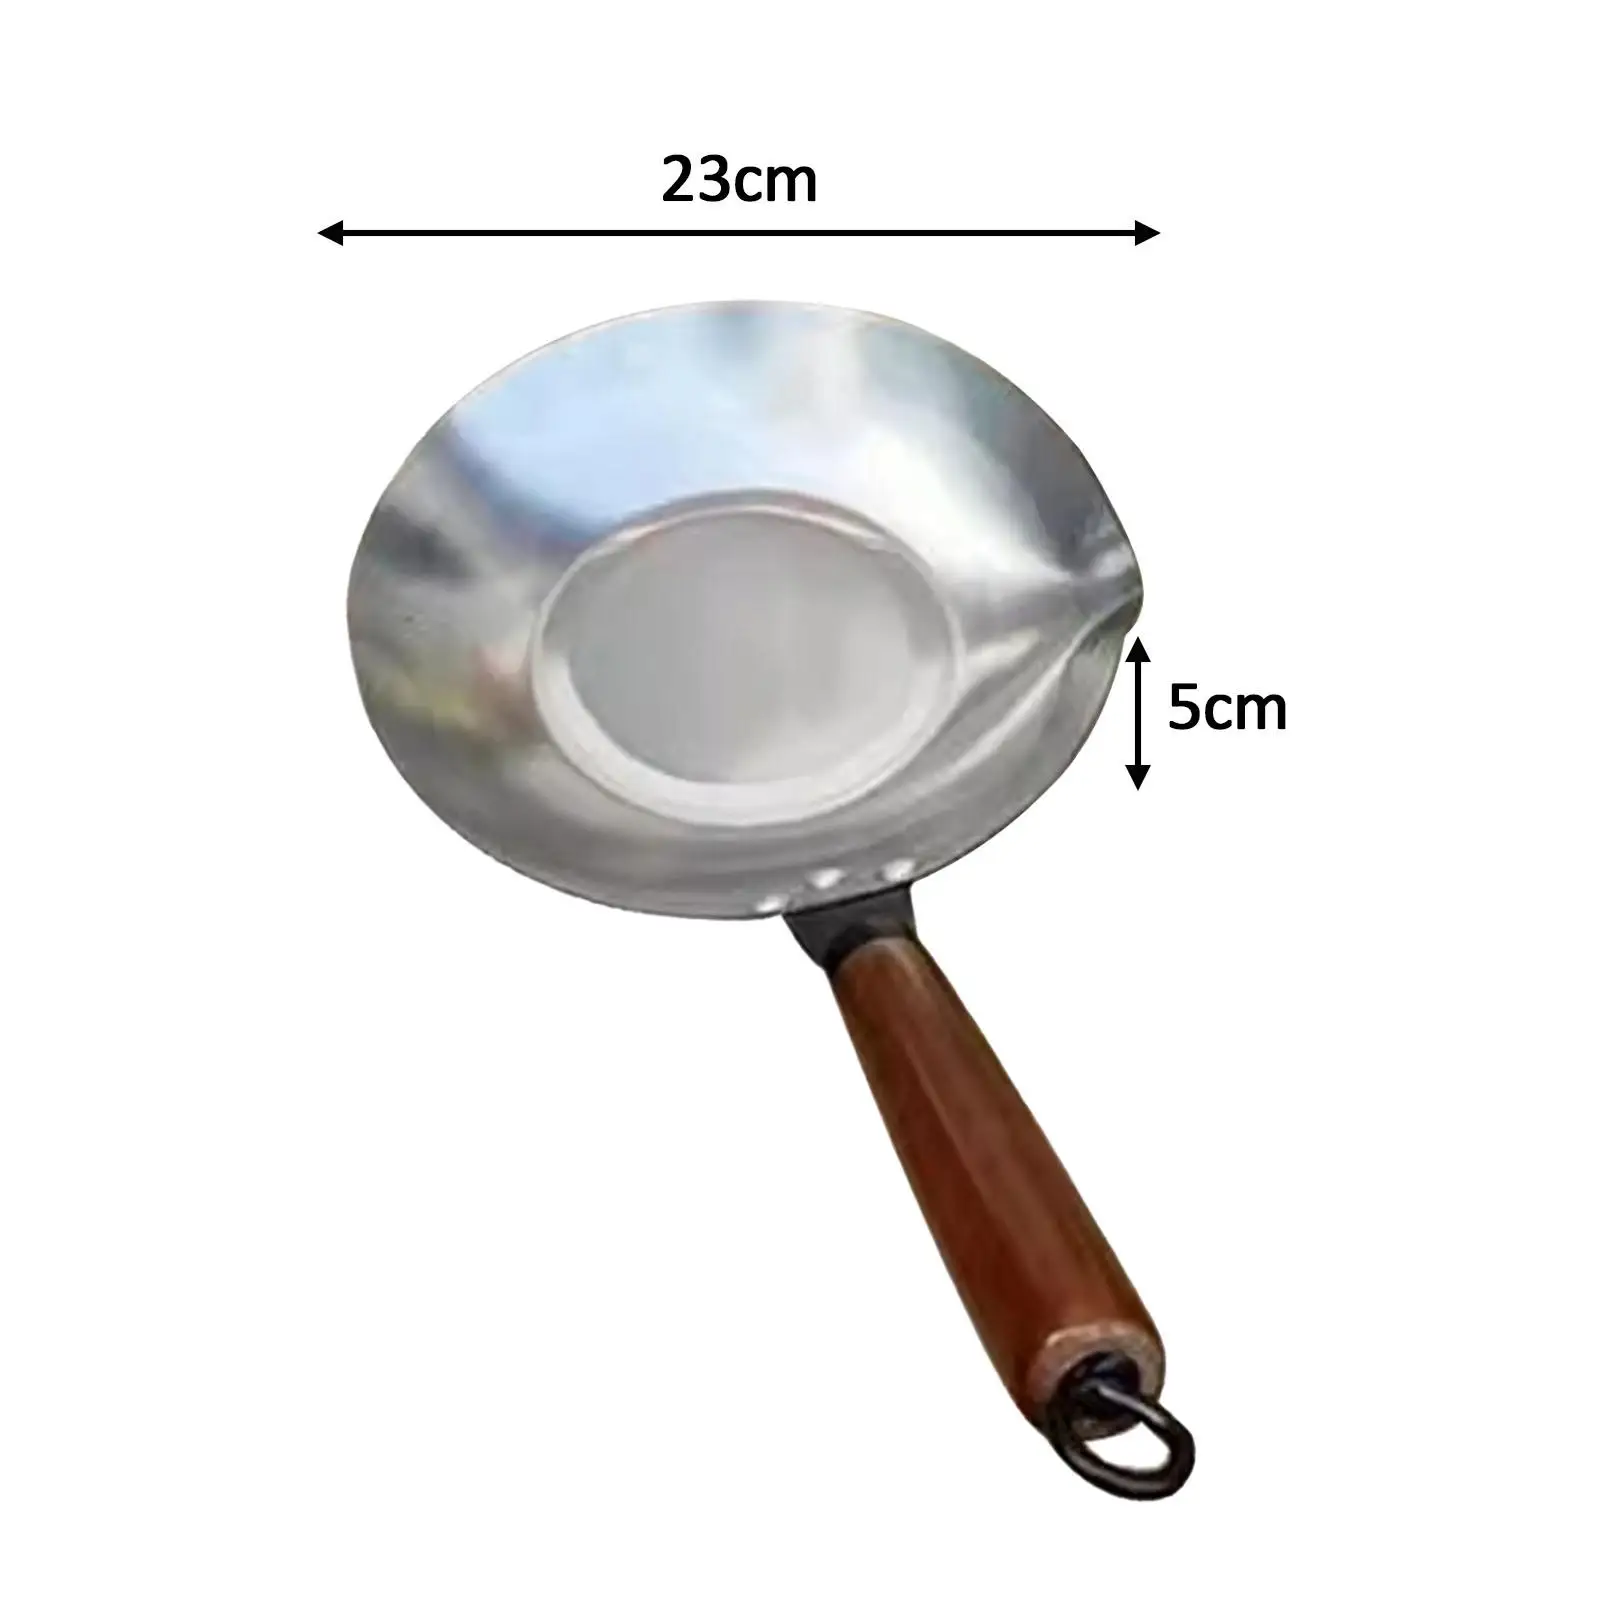 Sugar Pan Wooden Handle Melt Pan Candy Melting Pot Sugar Dipping Pan for Candied Haws Cheese Snacks Tanghulu Making Commercial